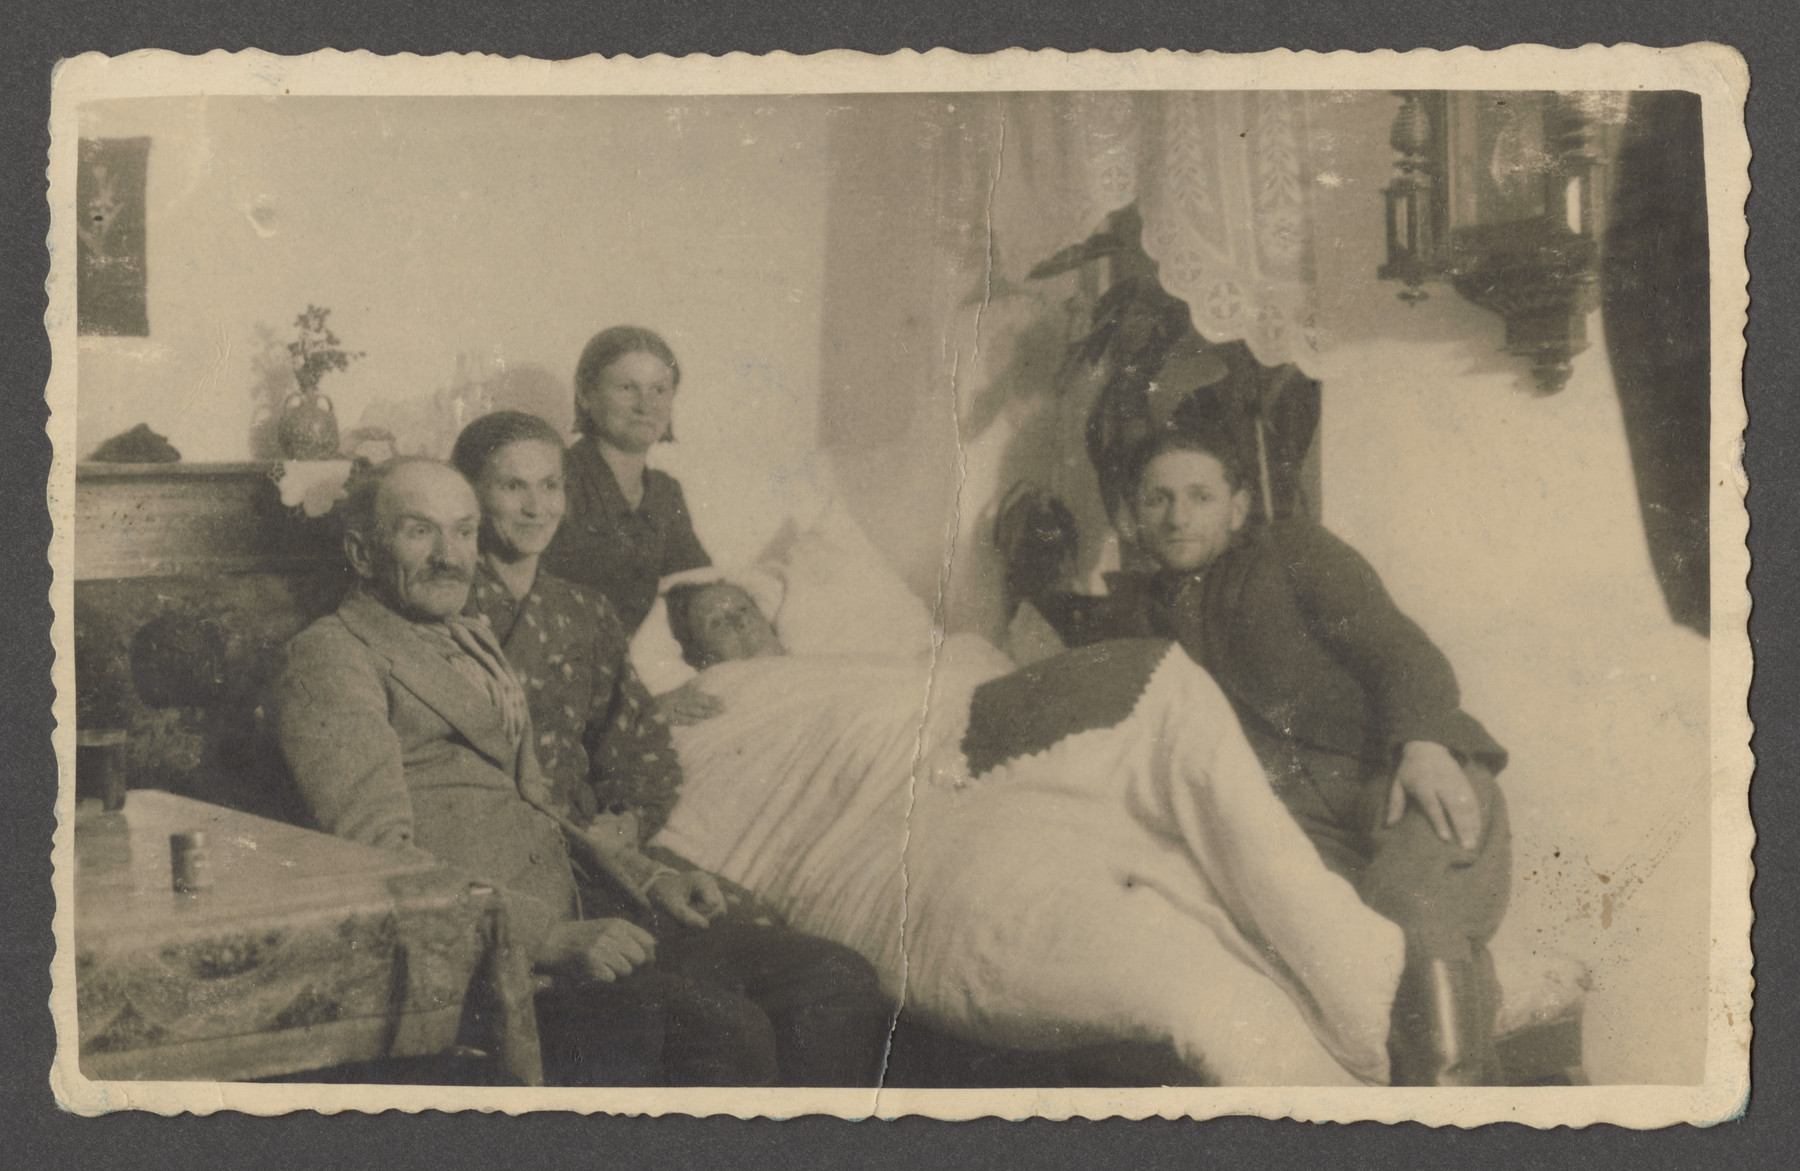 The Szwarcman family gathers around Leah Swzarcman shortly before her death.

Pictured from left to right are Joseph, Sophie, Sonia and Bennick Goldshein (Sophie's husband).